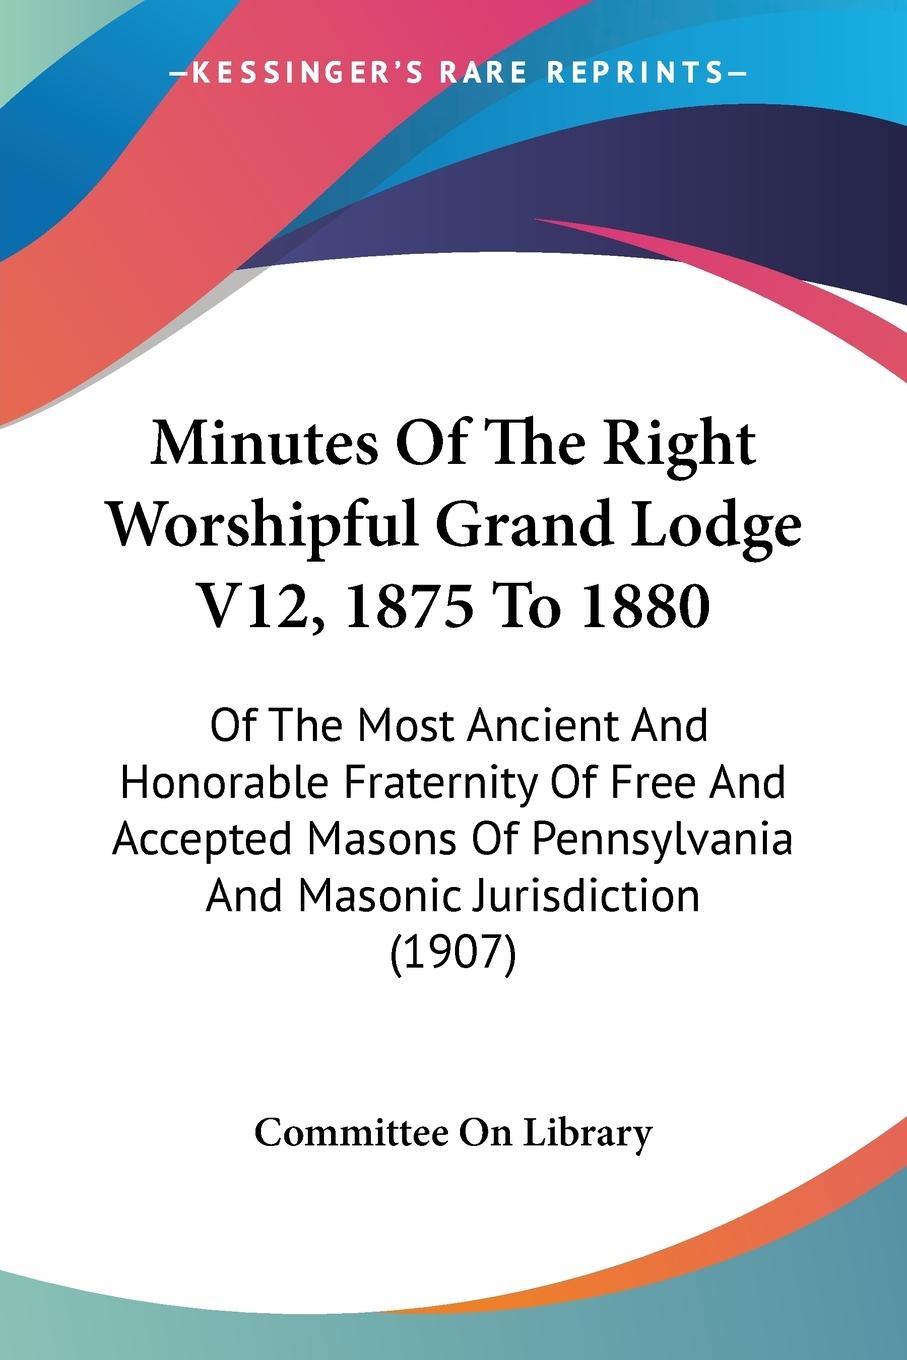 Minutes Of The Right Worshipful Grand Lodge V12, 1875 To 1880 - Committee On Library